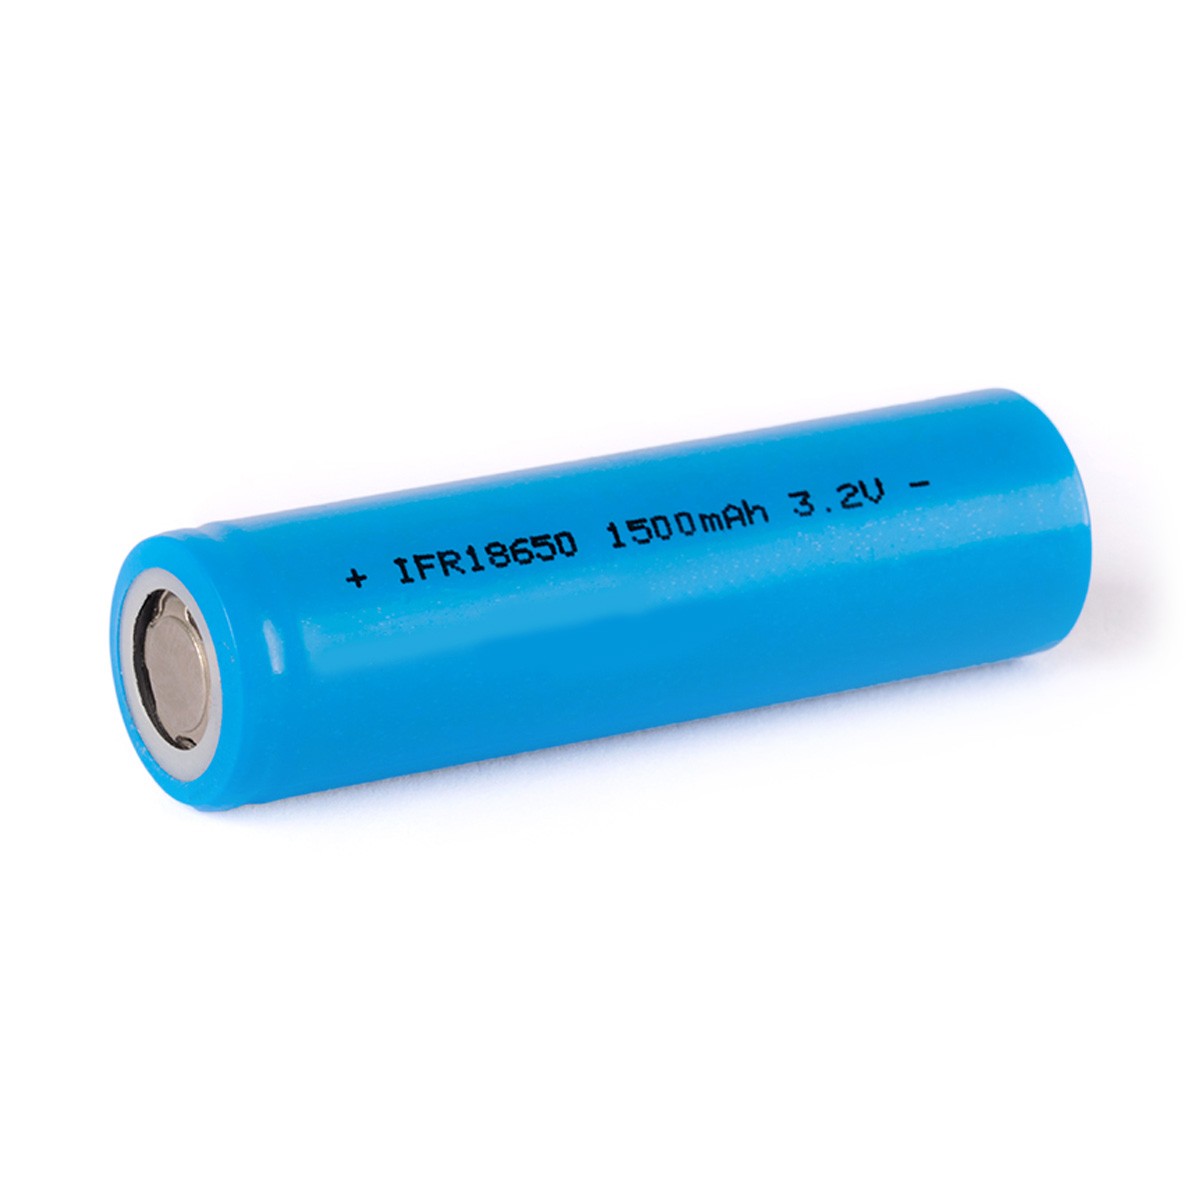 IFR18650 Battery LiFePO4 3.2V 1500mAh Rechargeable